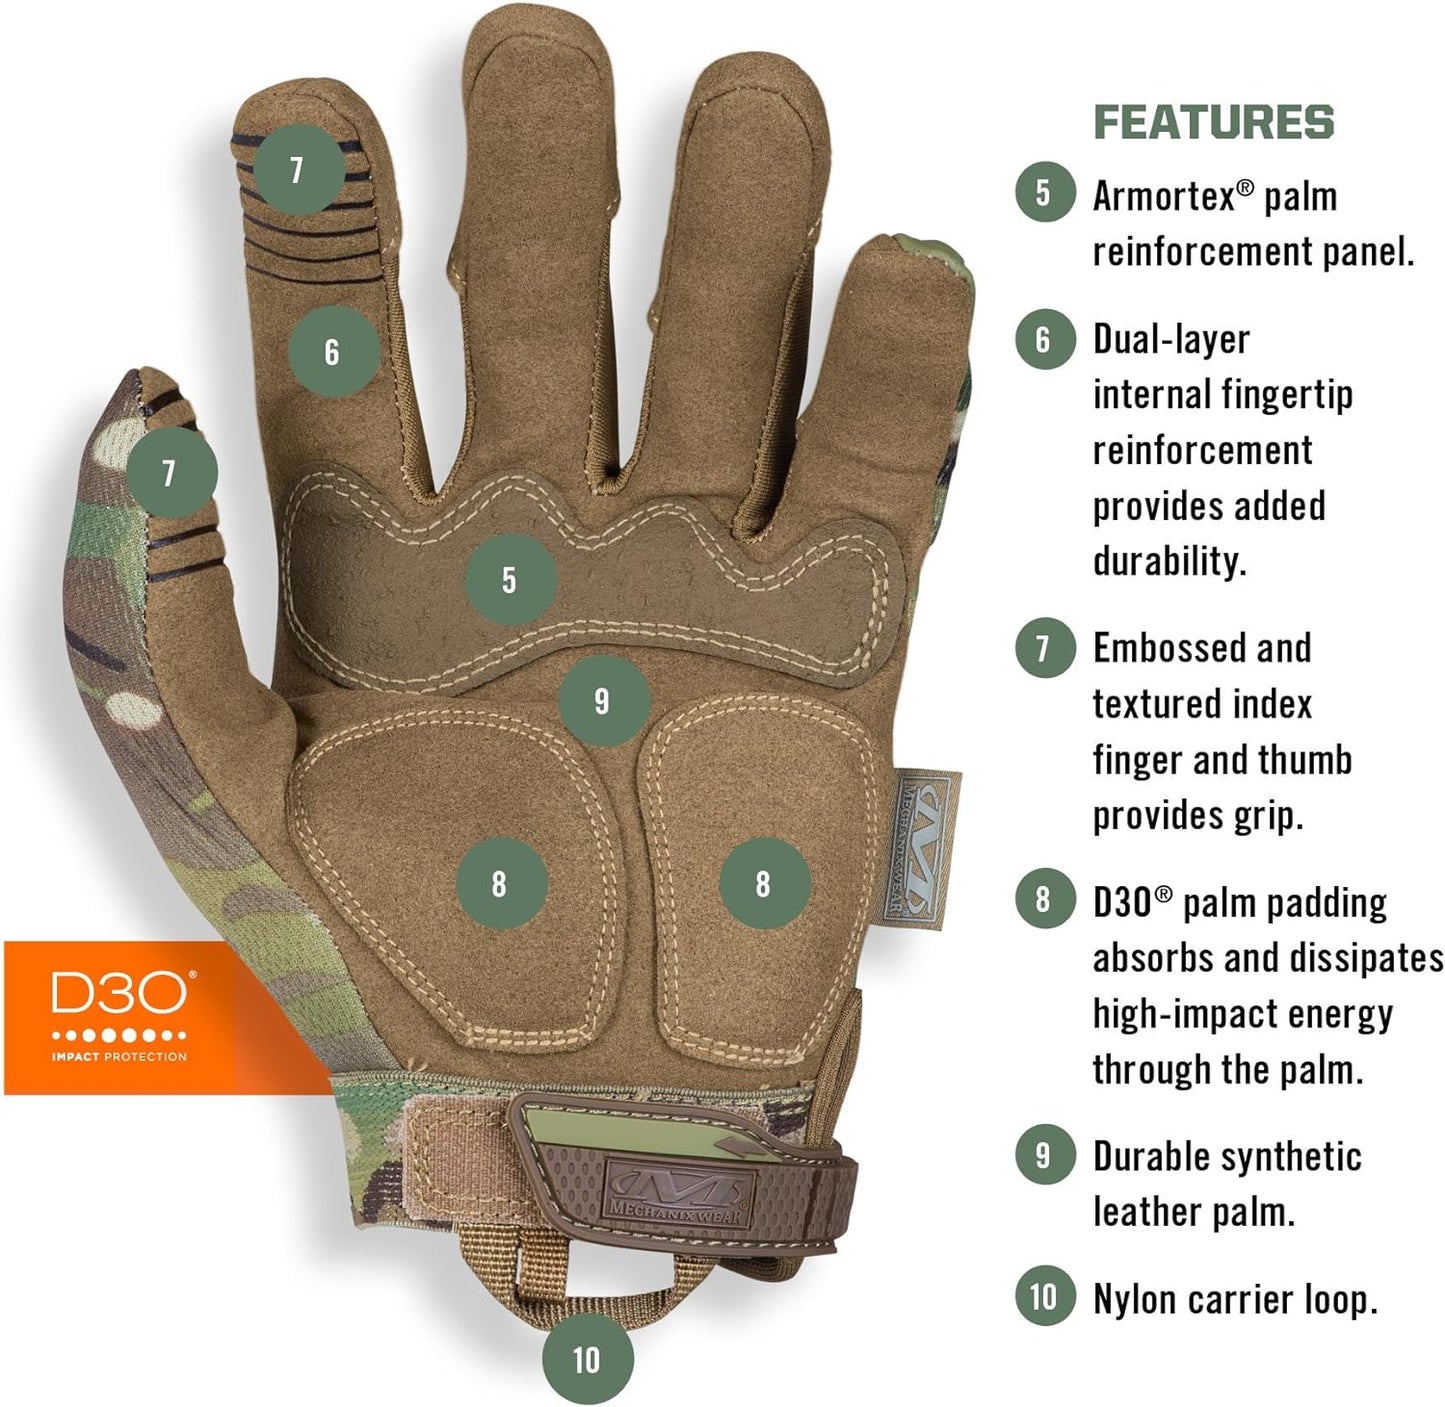 Mechanix Wear: M-Pact Tactical Gloves with Secure Fit, Touchscreen Capable Safety Gloves for Men, Work Gloves with Impact Protection and Vibration Absorption (Camouflage - MultiCam, XX-Large)